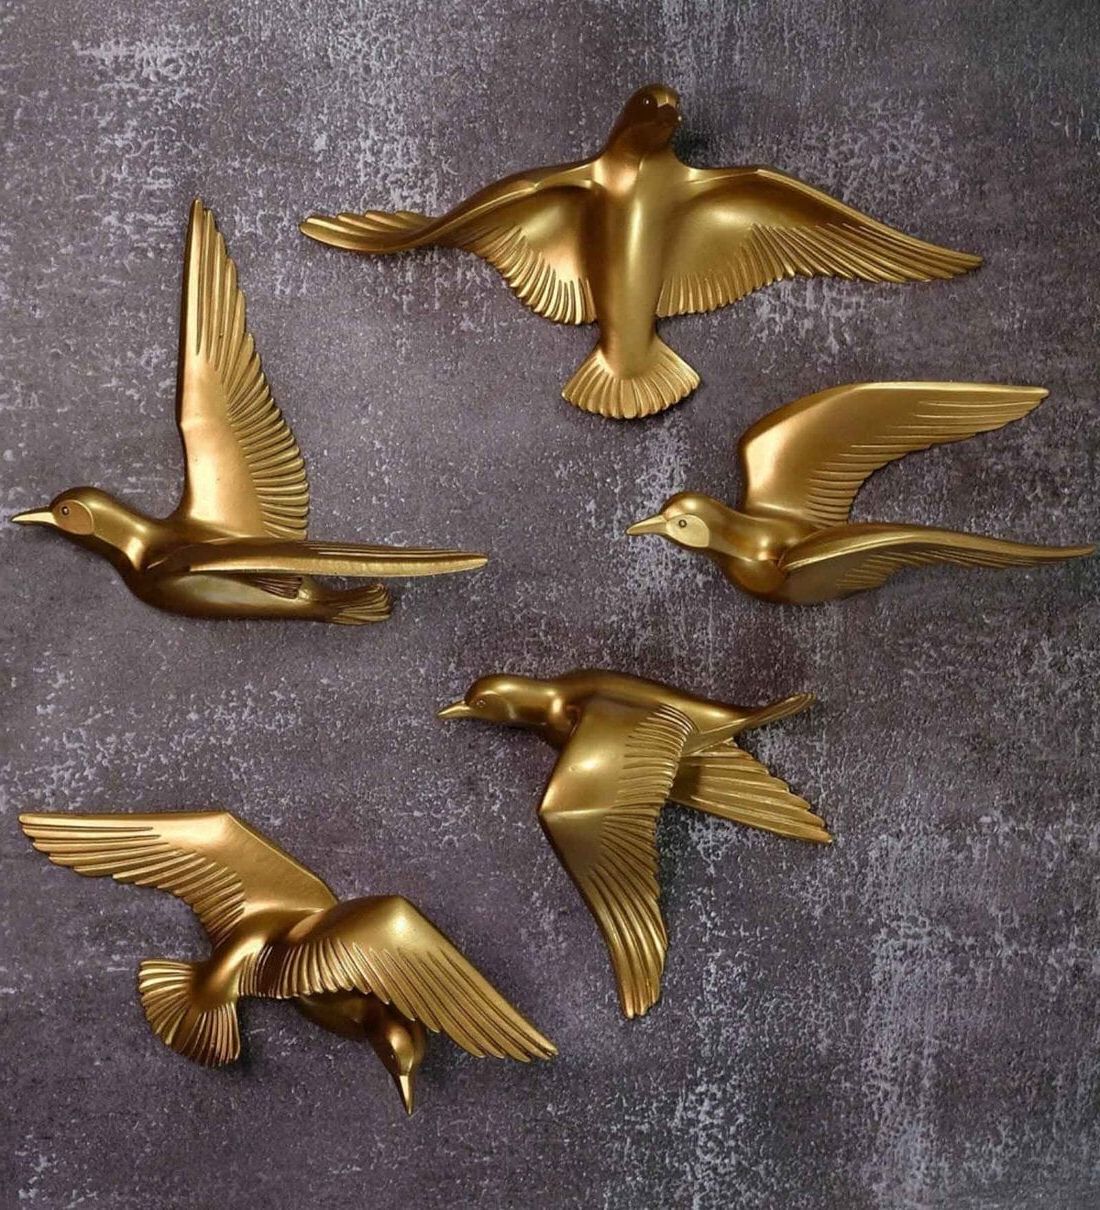 [%buy Metal Birds Wall Hanging – Set Of 5  Writings On The Wall At 48%  Offwritings On The Wall | Pepperfry With Regard To Most Up To Date Metal Bird Wall Sculpture Wall Art|metal Bird Wall Sculpture Wall Art Throughout Best And Newest Buy Metal Birds Wall Hanging – Set Of 5  Writings On The Wall At 48%  Offwritings On The Wall | Pepperfry|most Current Metal Bird Wall Sculpture Wall Art Inside Buy Metal Birds Wall Hanging – Set Of 5  Writings On The Wall At 48%  Offwritings On The Wall | Pepperfry|best And Newest Buy Metal Birds Wall Hanging – Set Of 5  Writings On The Wall At 48%  Offwritings On The Wall | Pepperfry With Metal Bird Wall Sculpture Wall Art%] (Photo 10 of 15)